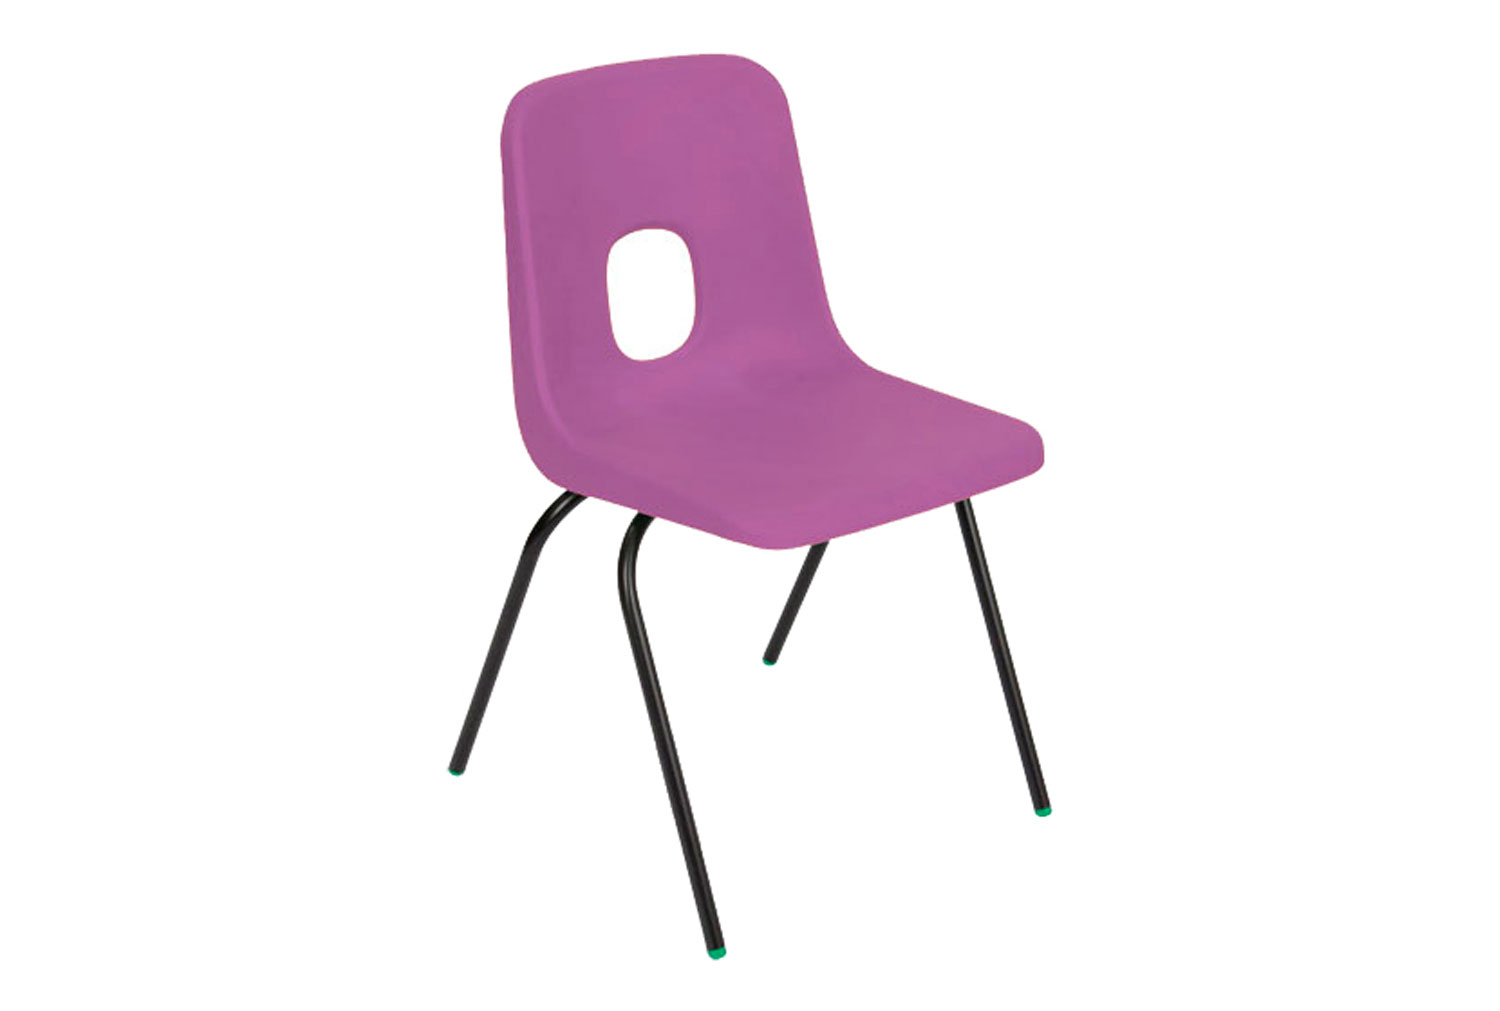 Qty 8 - Hille E Series Classroom Chair, 14+ Years - 41wx37dx46h (cm), Black Frame, Purple